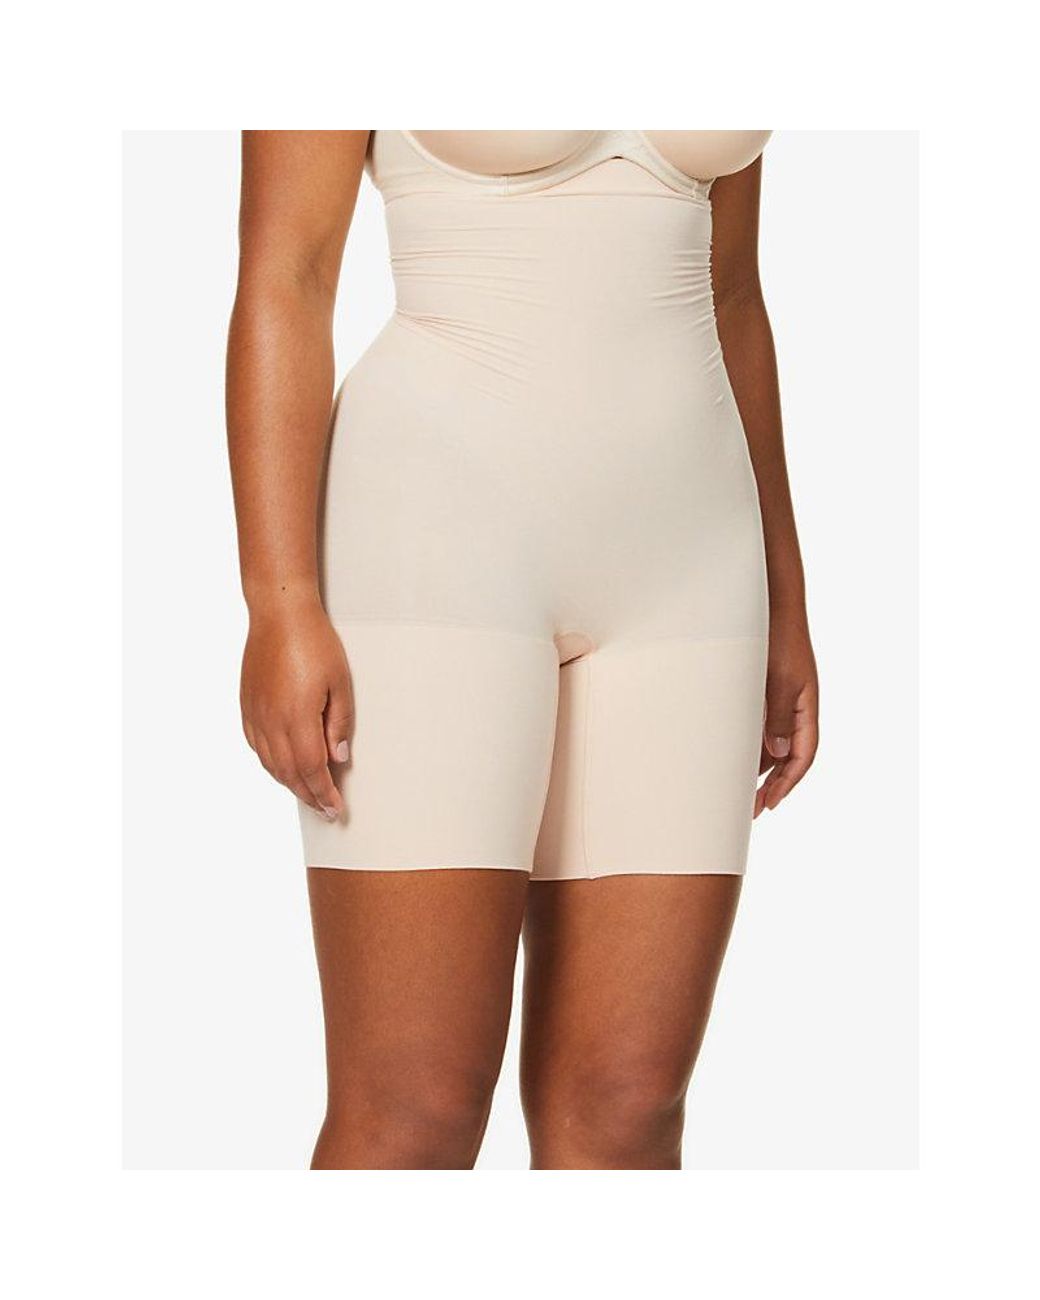 Spanx Higher Power Shorts in White